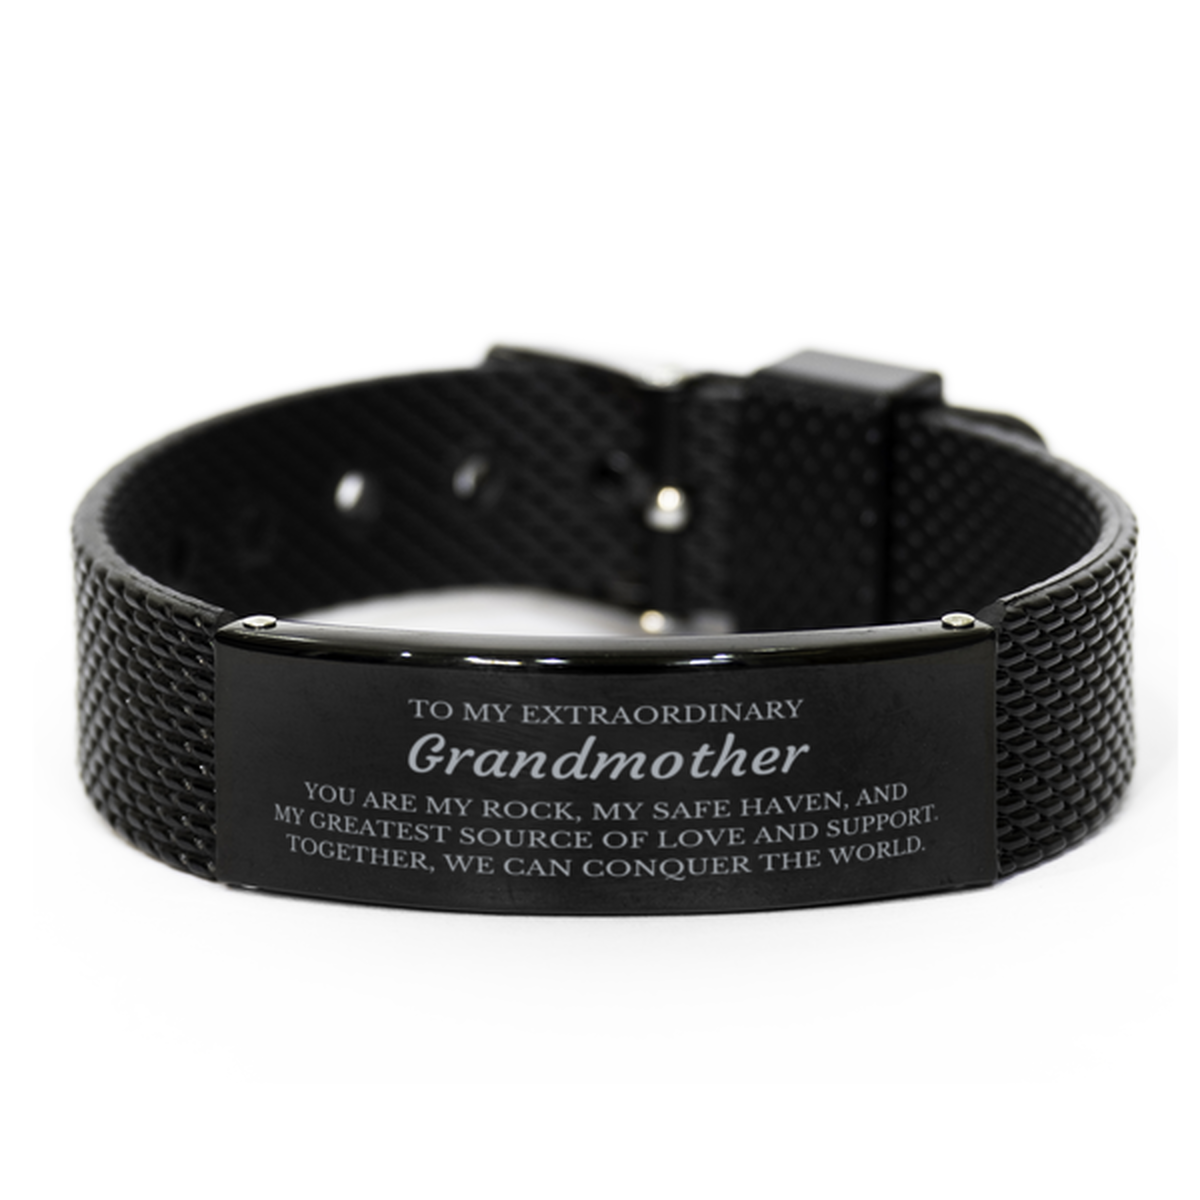 To My Extraordinary Grandmother Gifts, Together, we can conquer the world, Birthday Black Shark Mesh Bracelet For Grandmother, Christmas Gifts For Grandmother